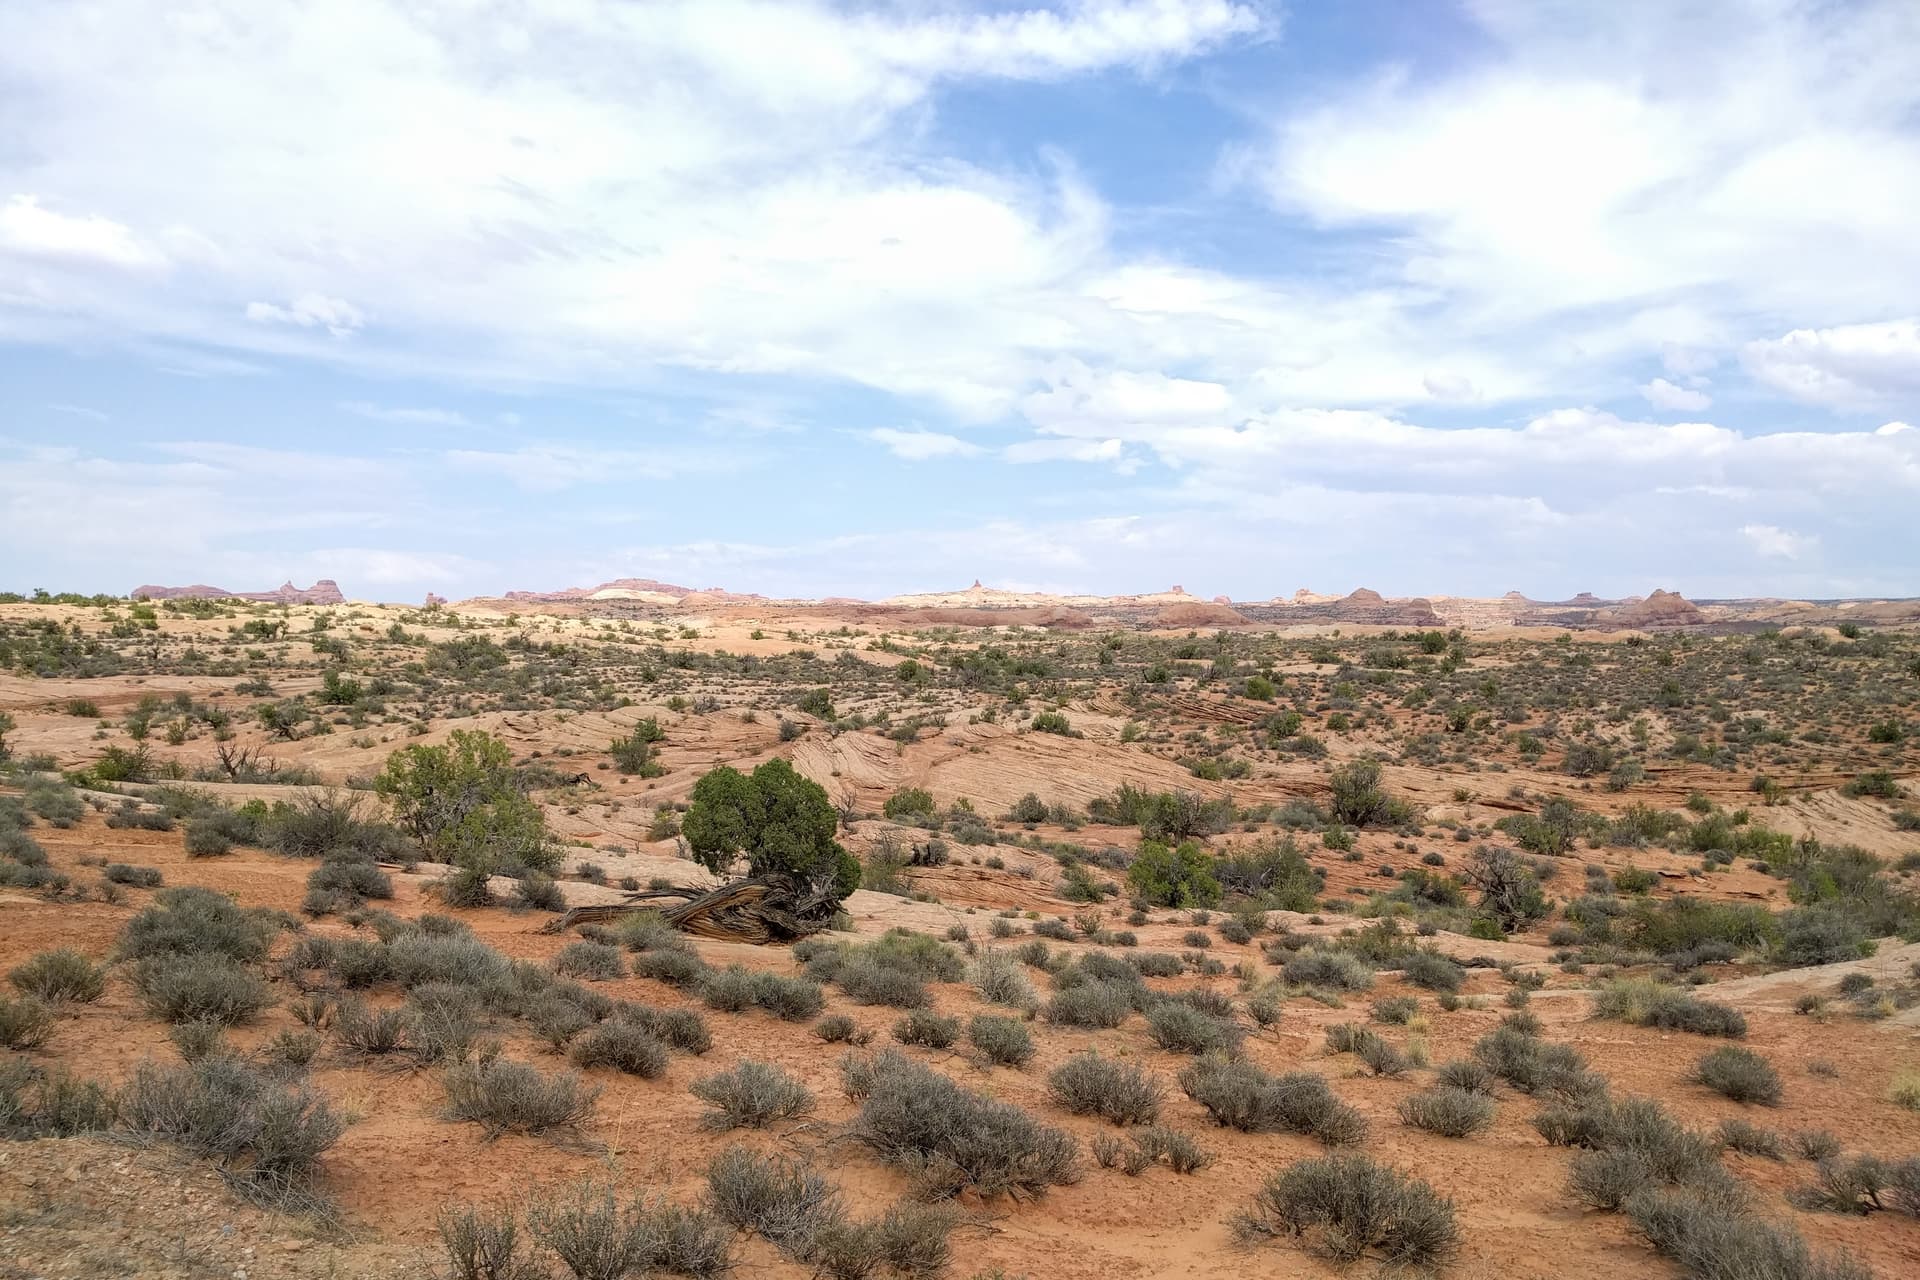 Looking east across a series of 'fossil' sand dunes at Arches National Park. Some of the park's arches and mesas can be seen on the horizon. In the foreground, a small bush grows in a wave-like twist that seems to mimic the fossilized dunes.